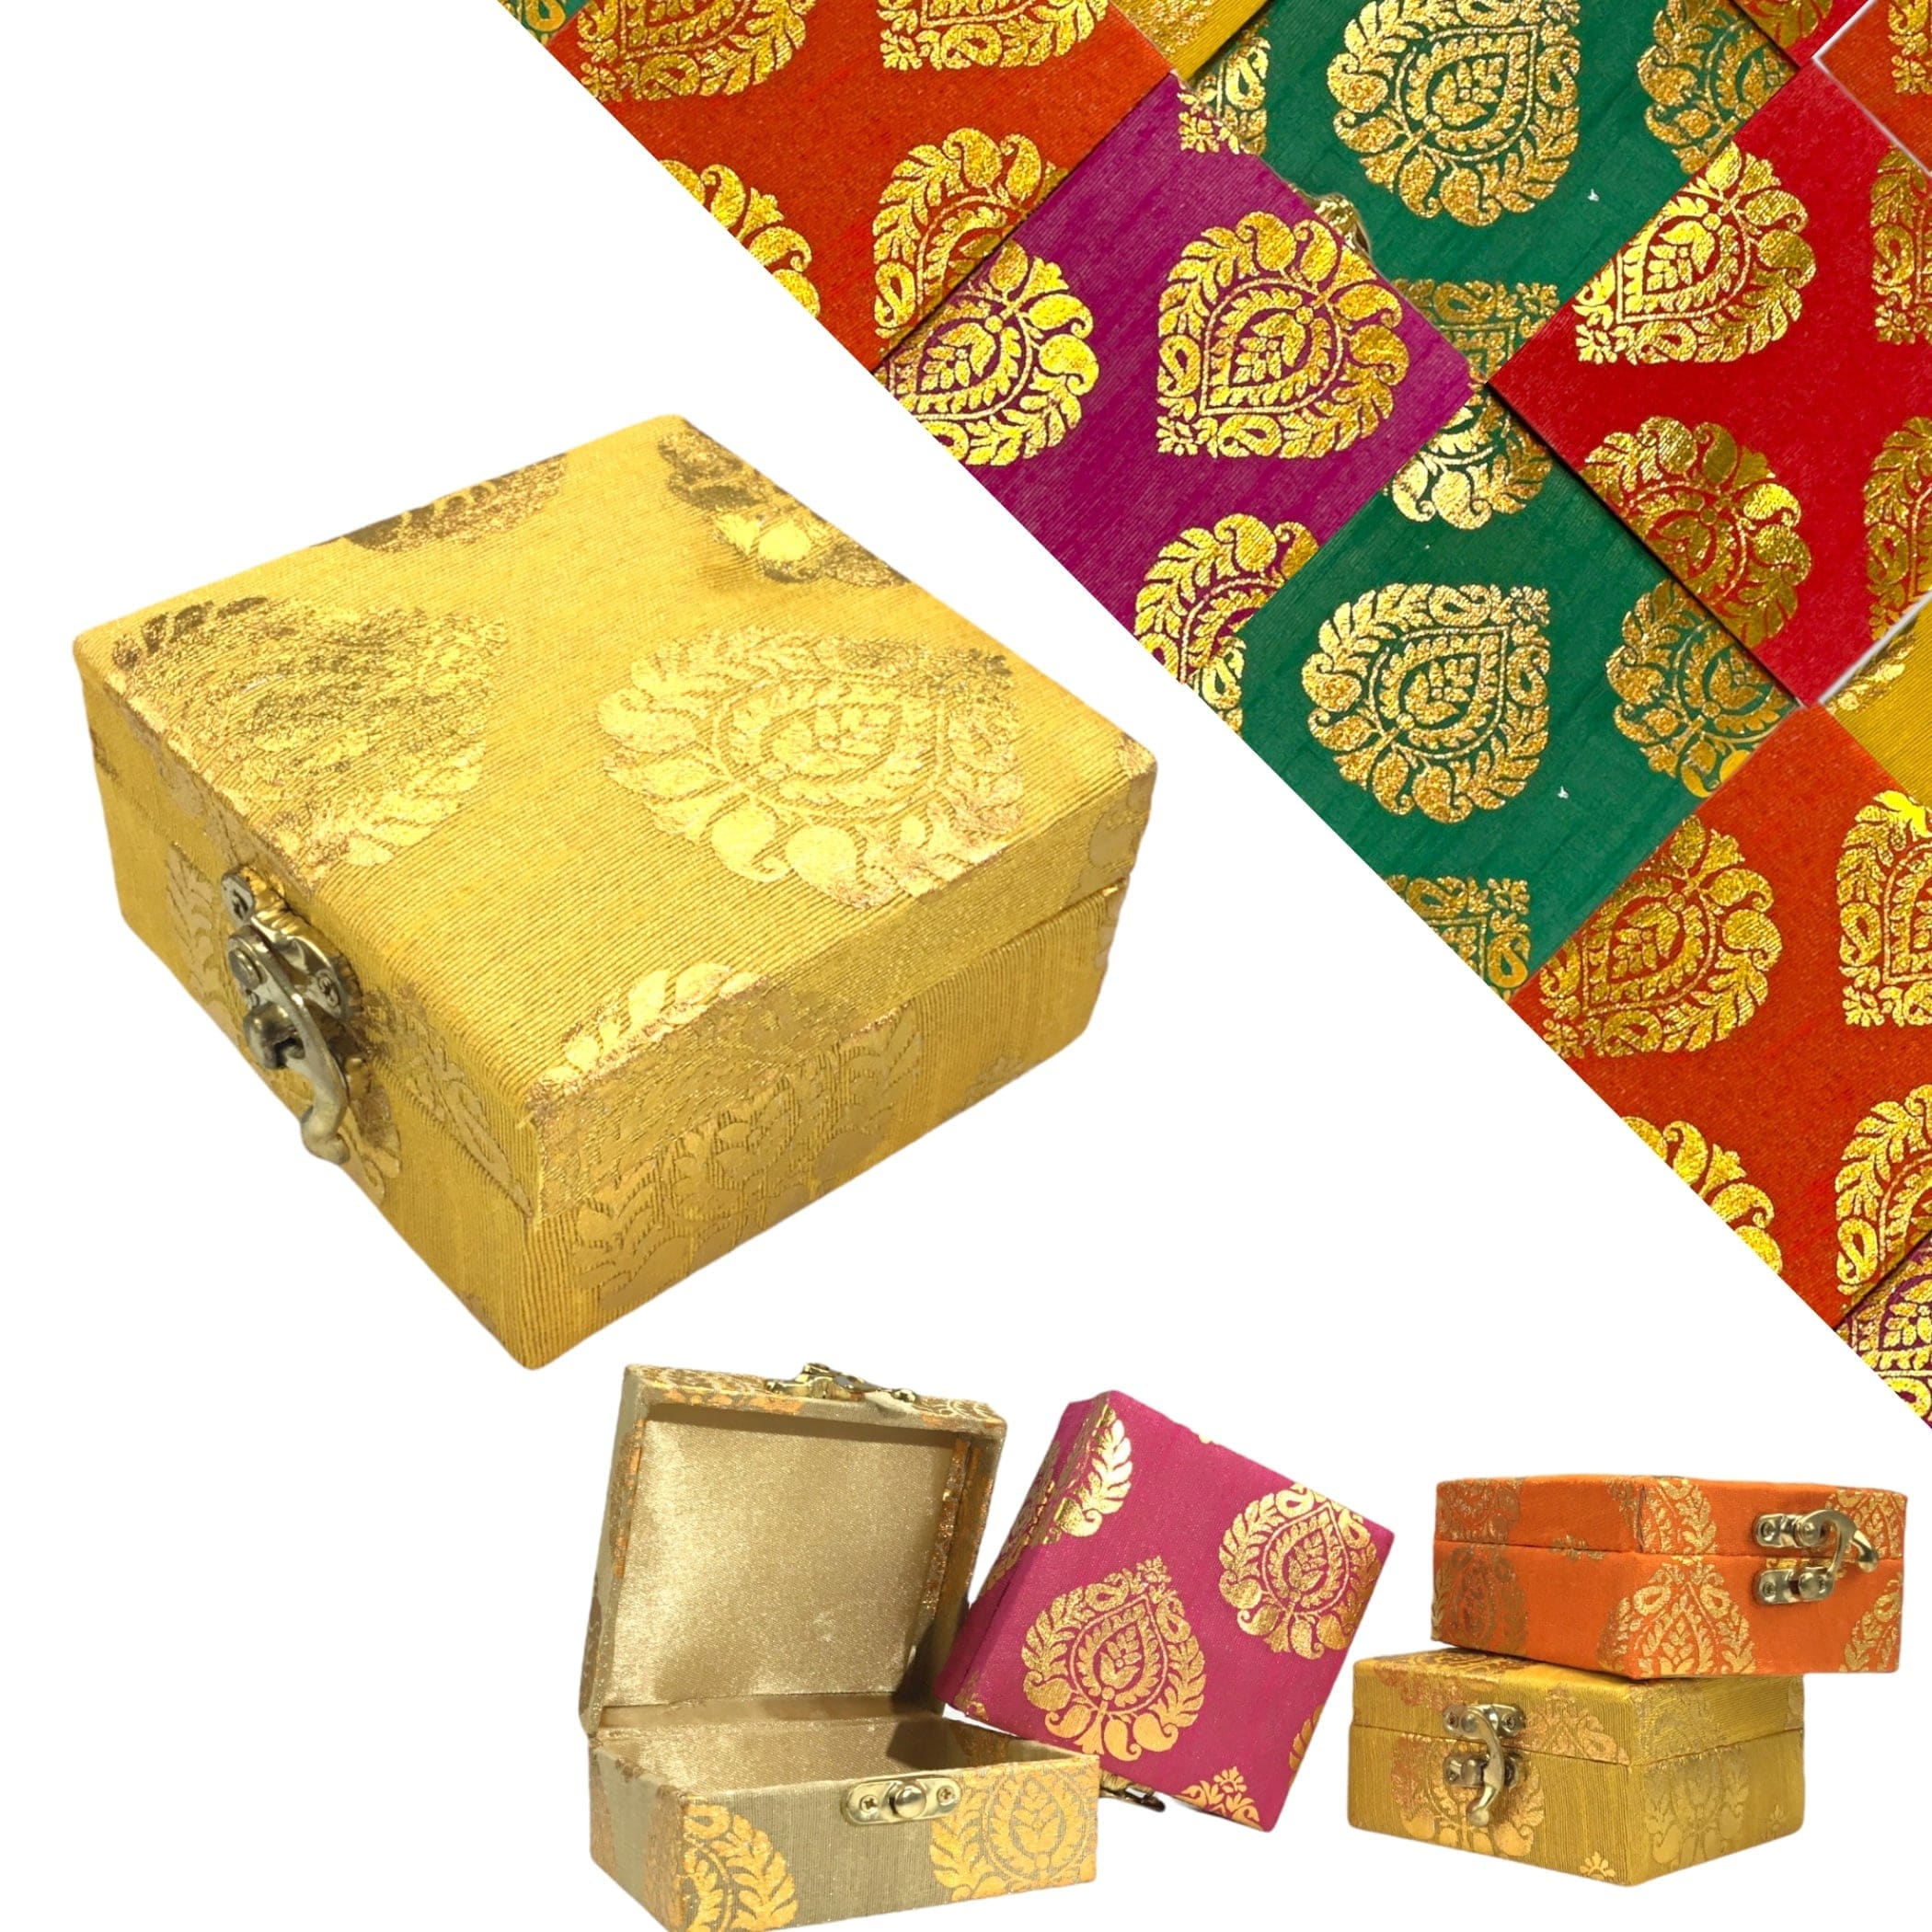 Small handmade jewelry box brocade gift boxes favor for